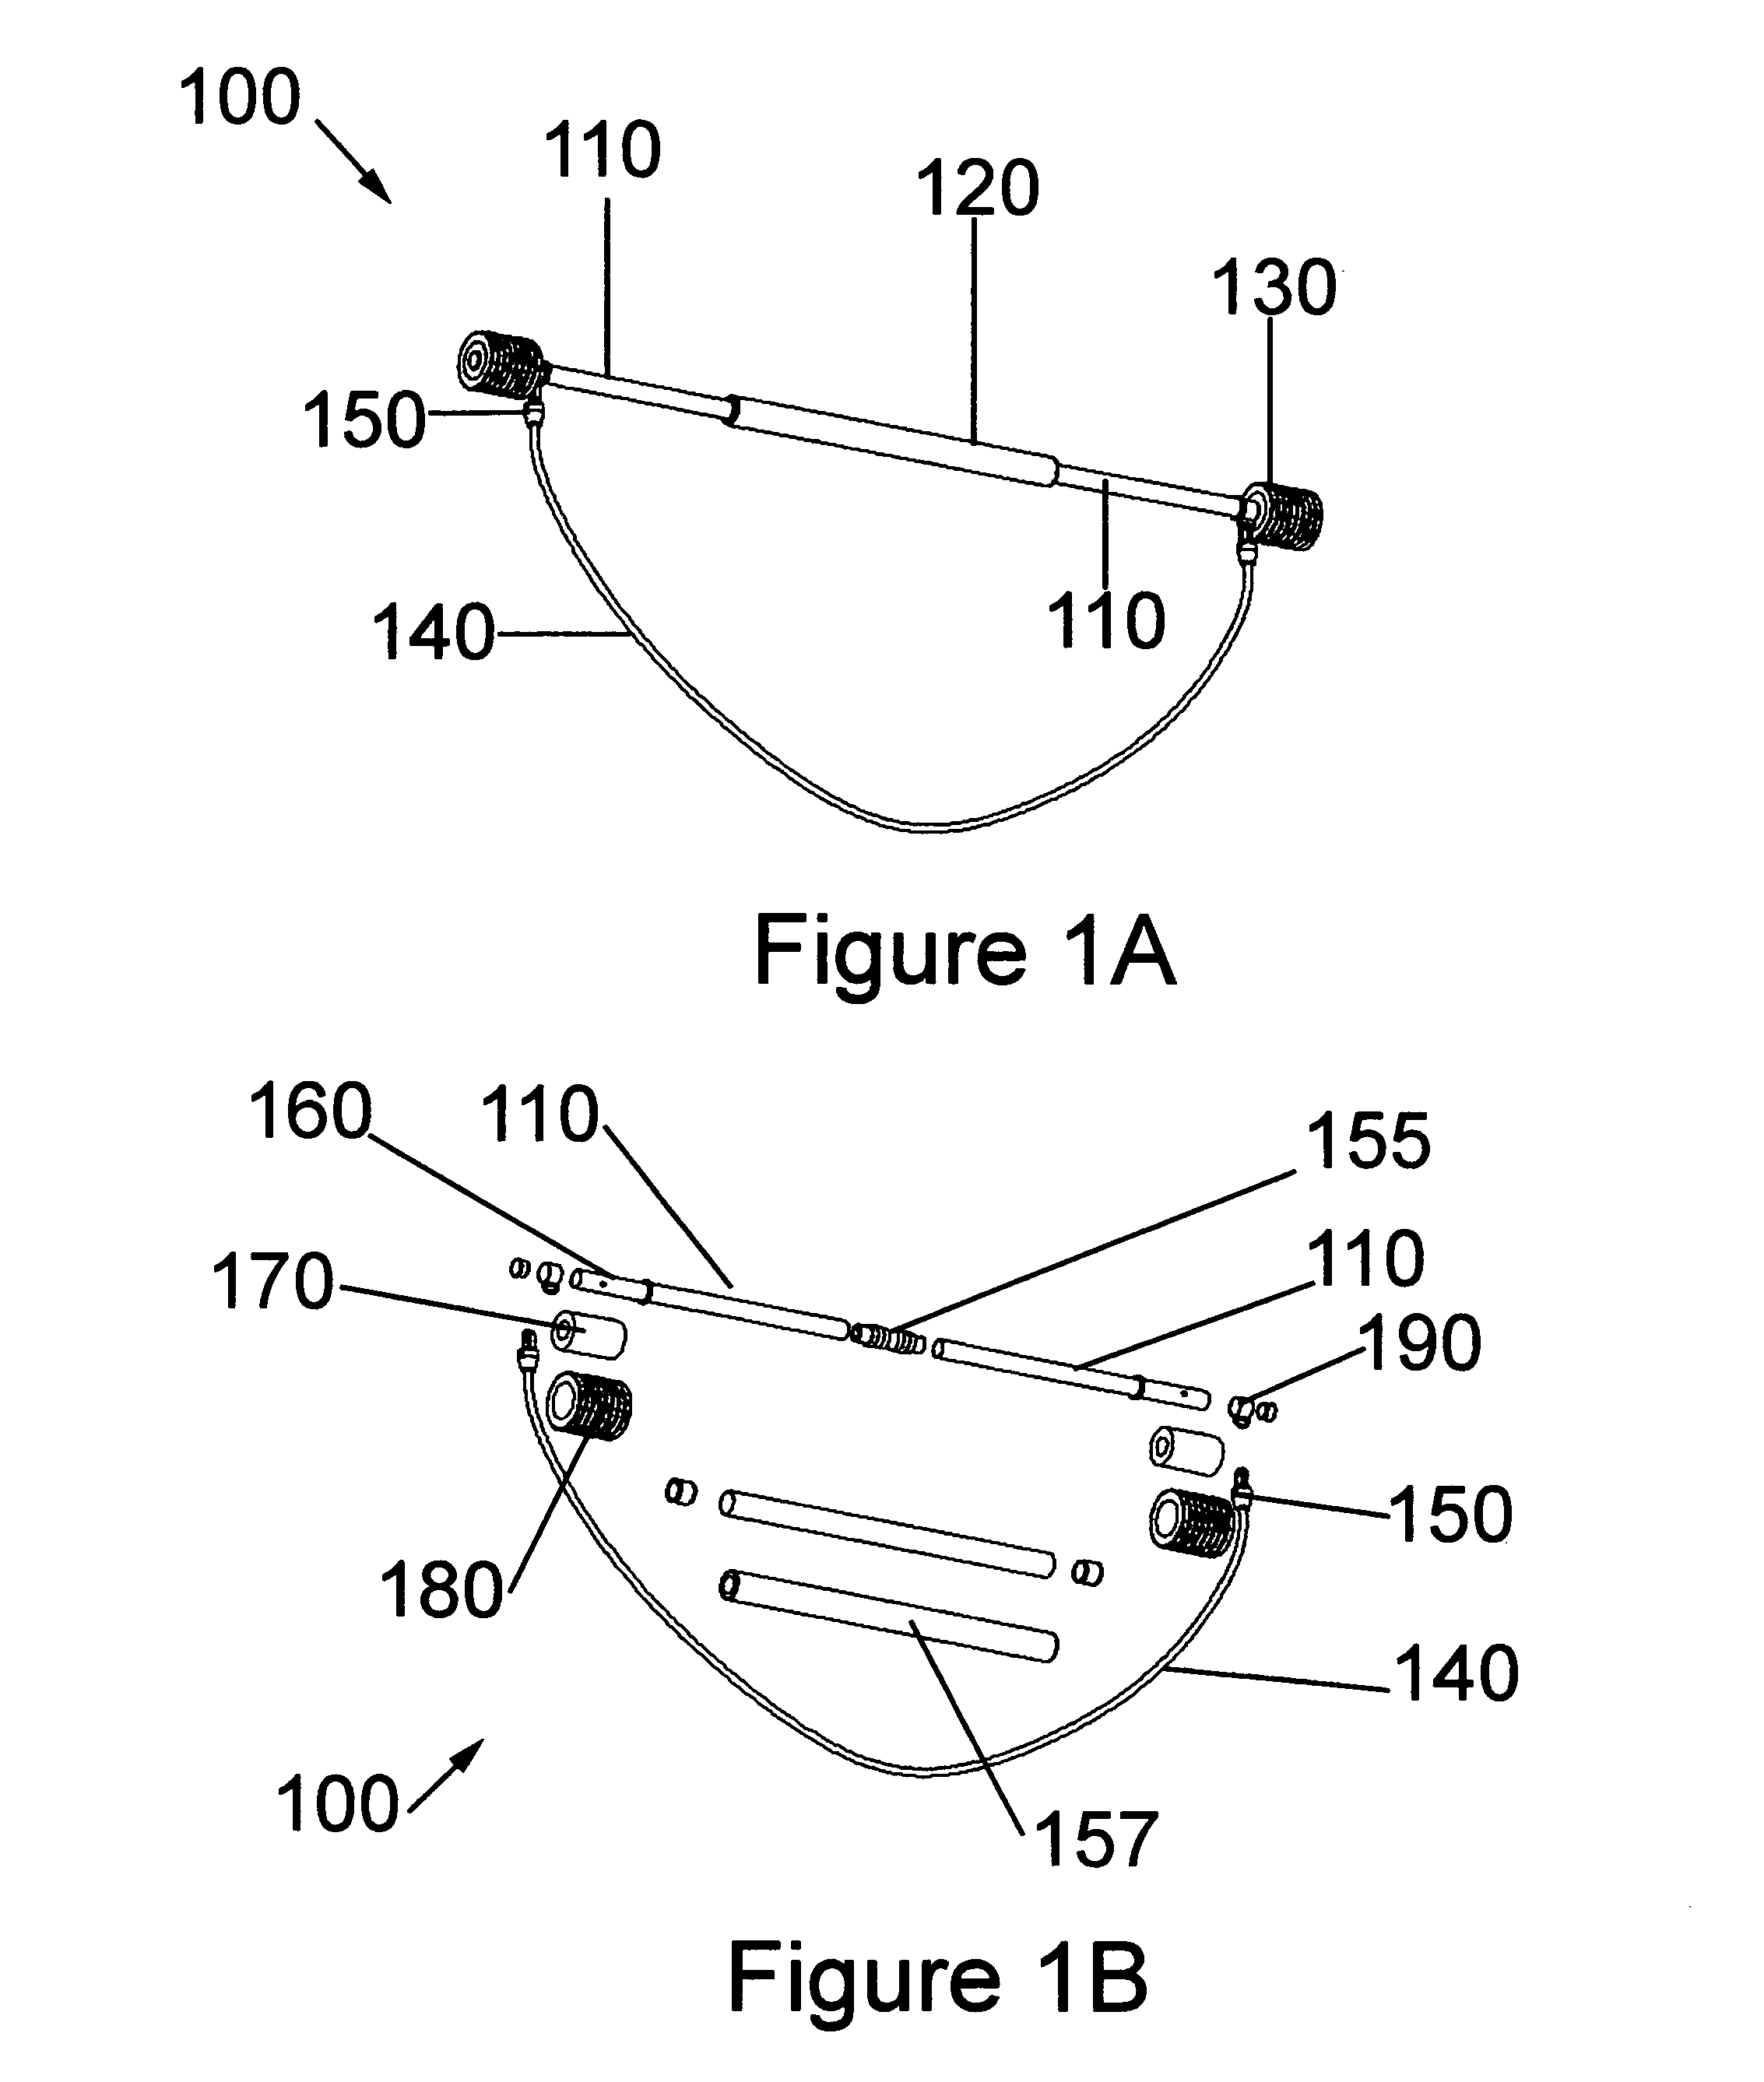 Exercise roll bar device